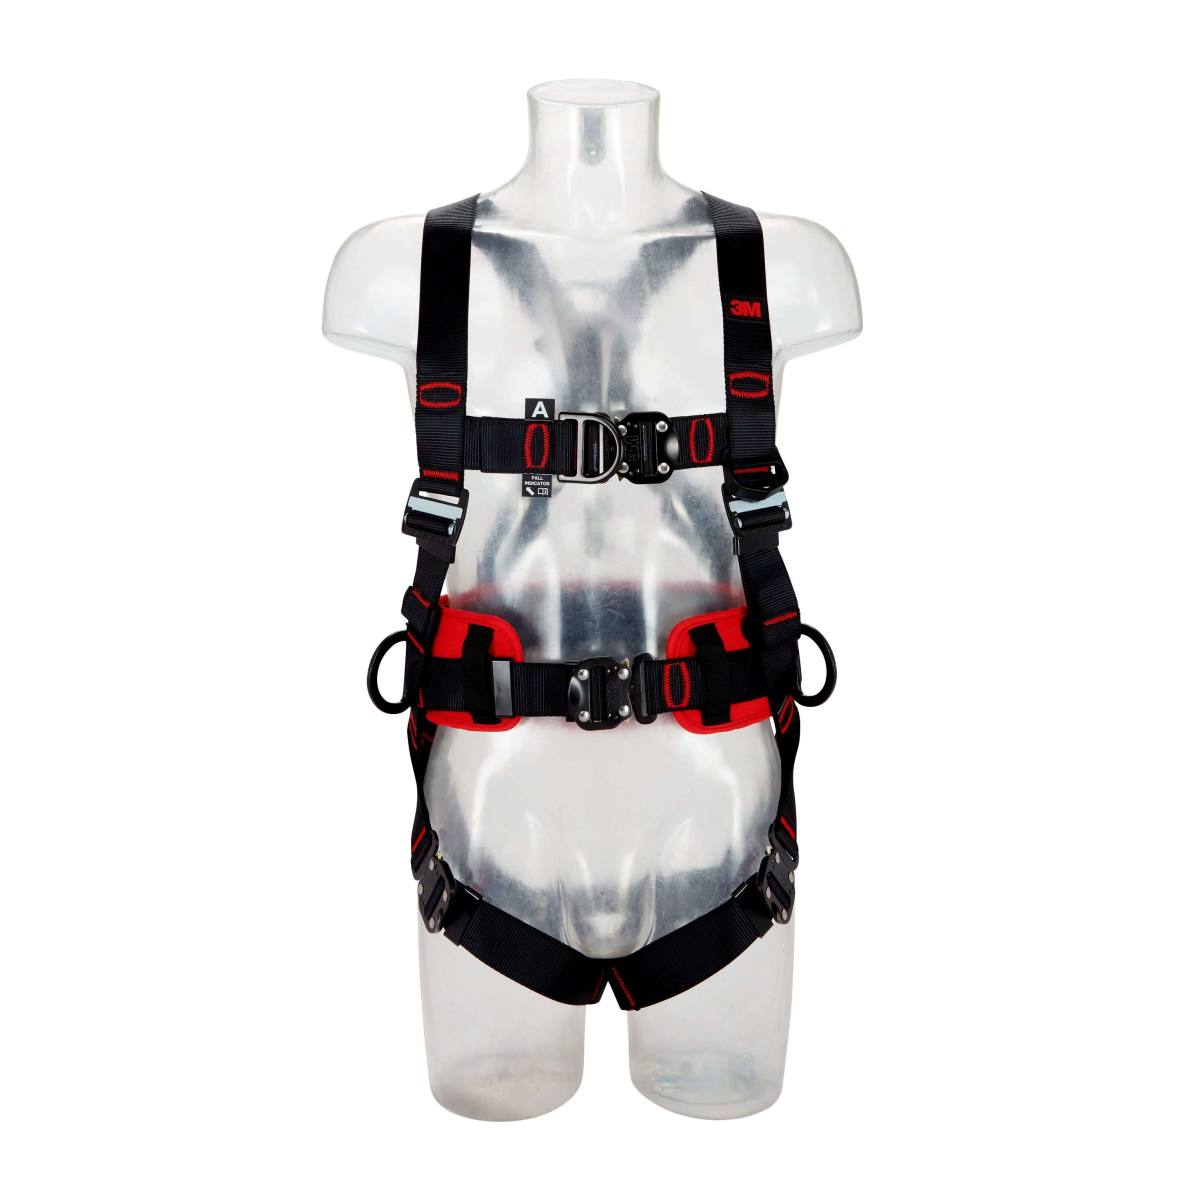  3M PROTECTA Full body harness - chest and rear fall arrest eyelets, comfort harness with side retaining eyelets, automatic buckles, chest and rear fall indicators, belt end depot, label protection with labelling field, black-coated, S